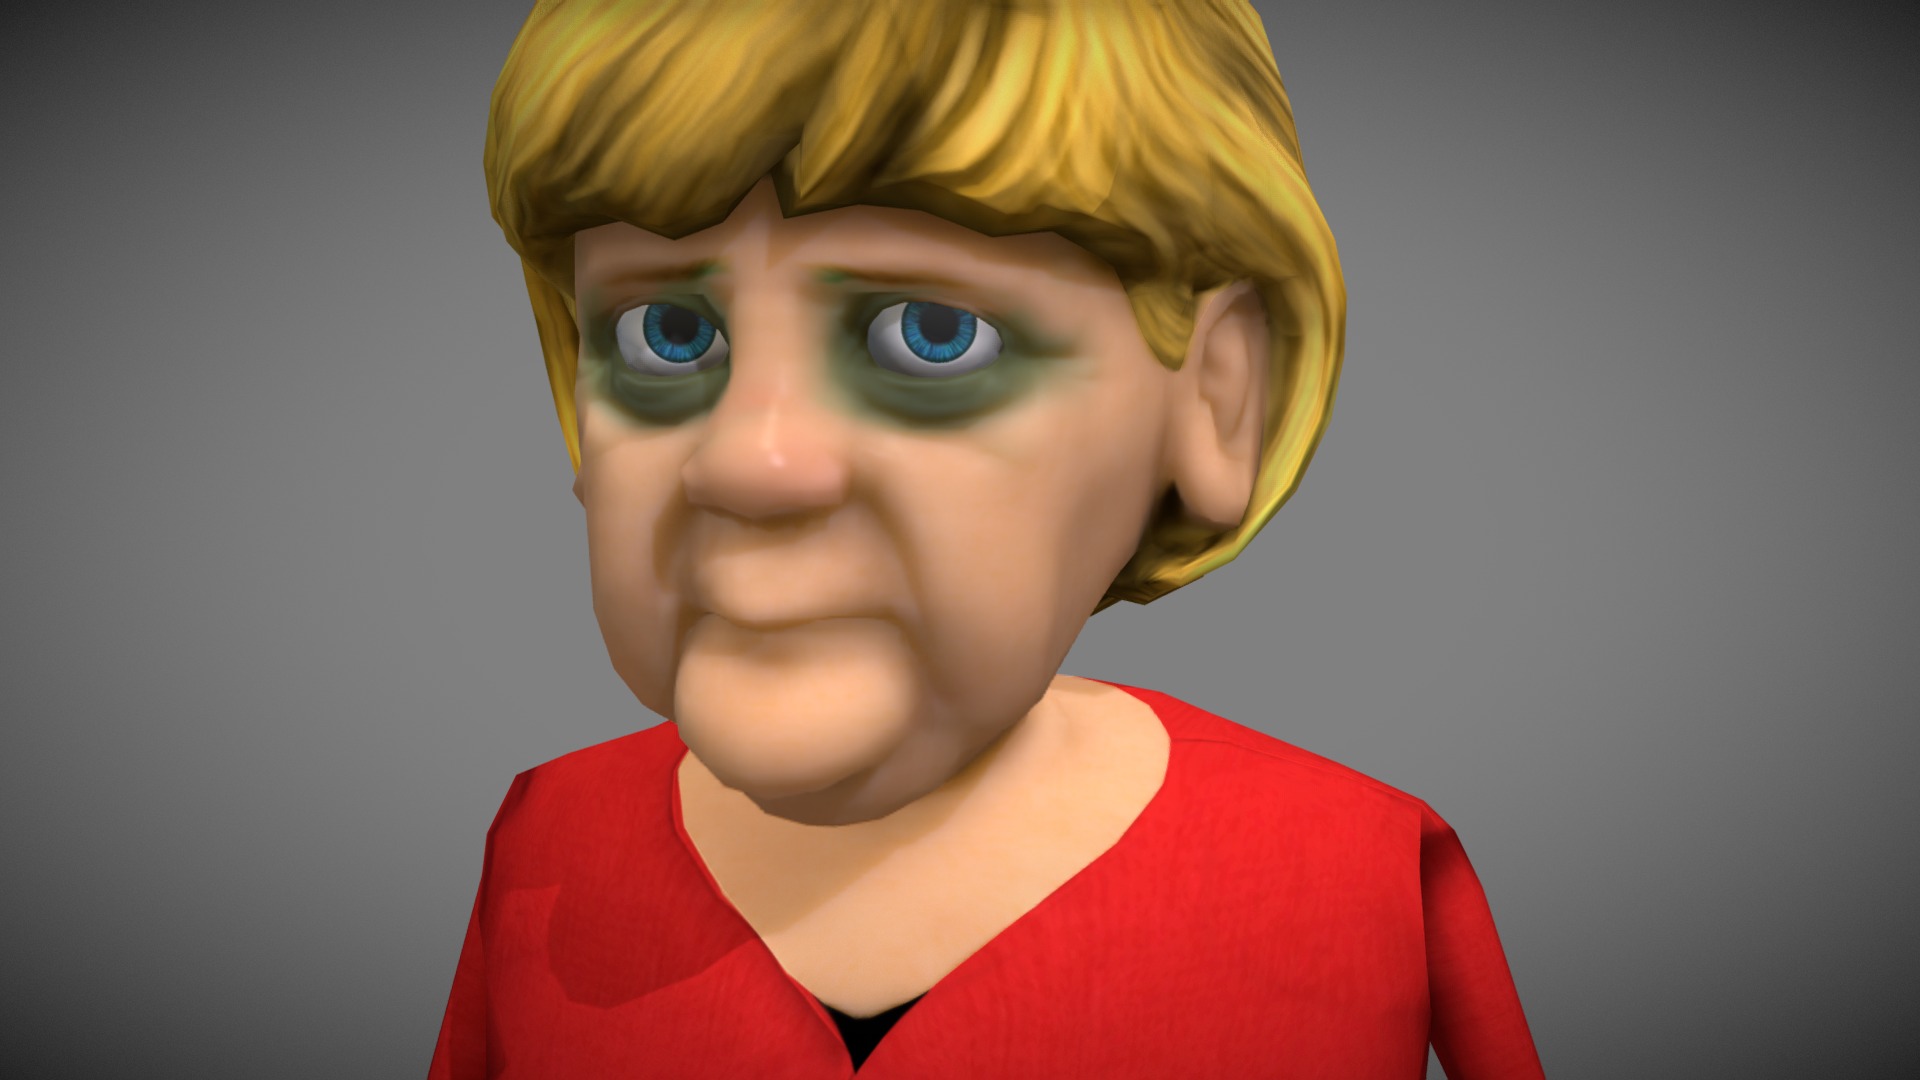 3D model Politische - This is a 3D model of the Politische. The 3D model is about a person with yellow hair.